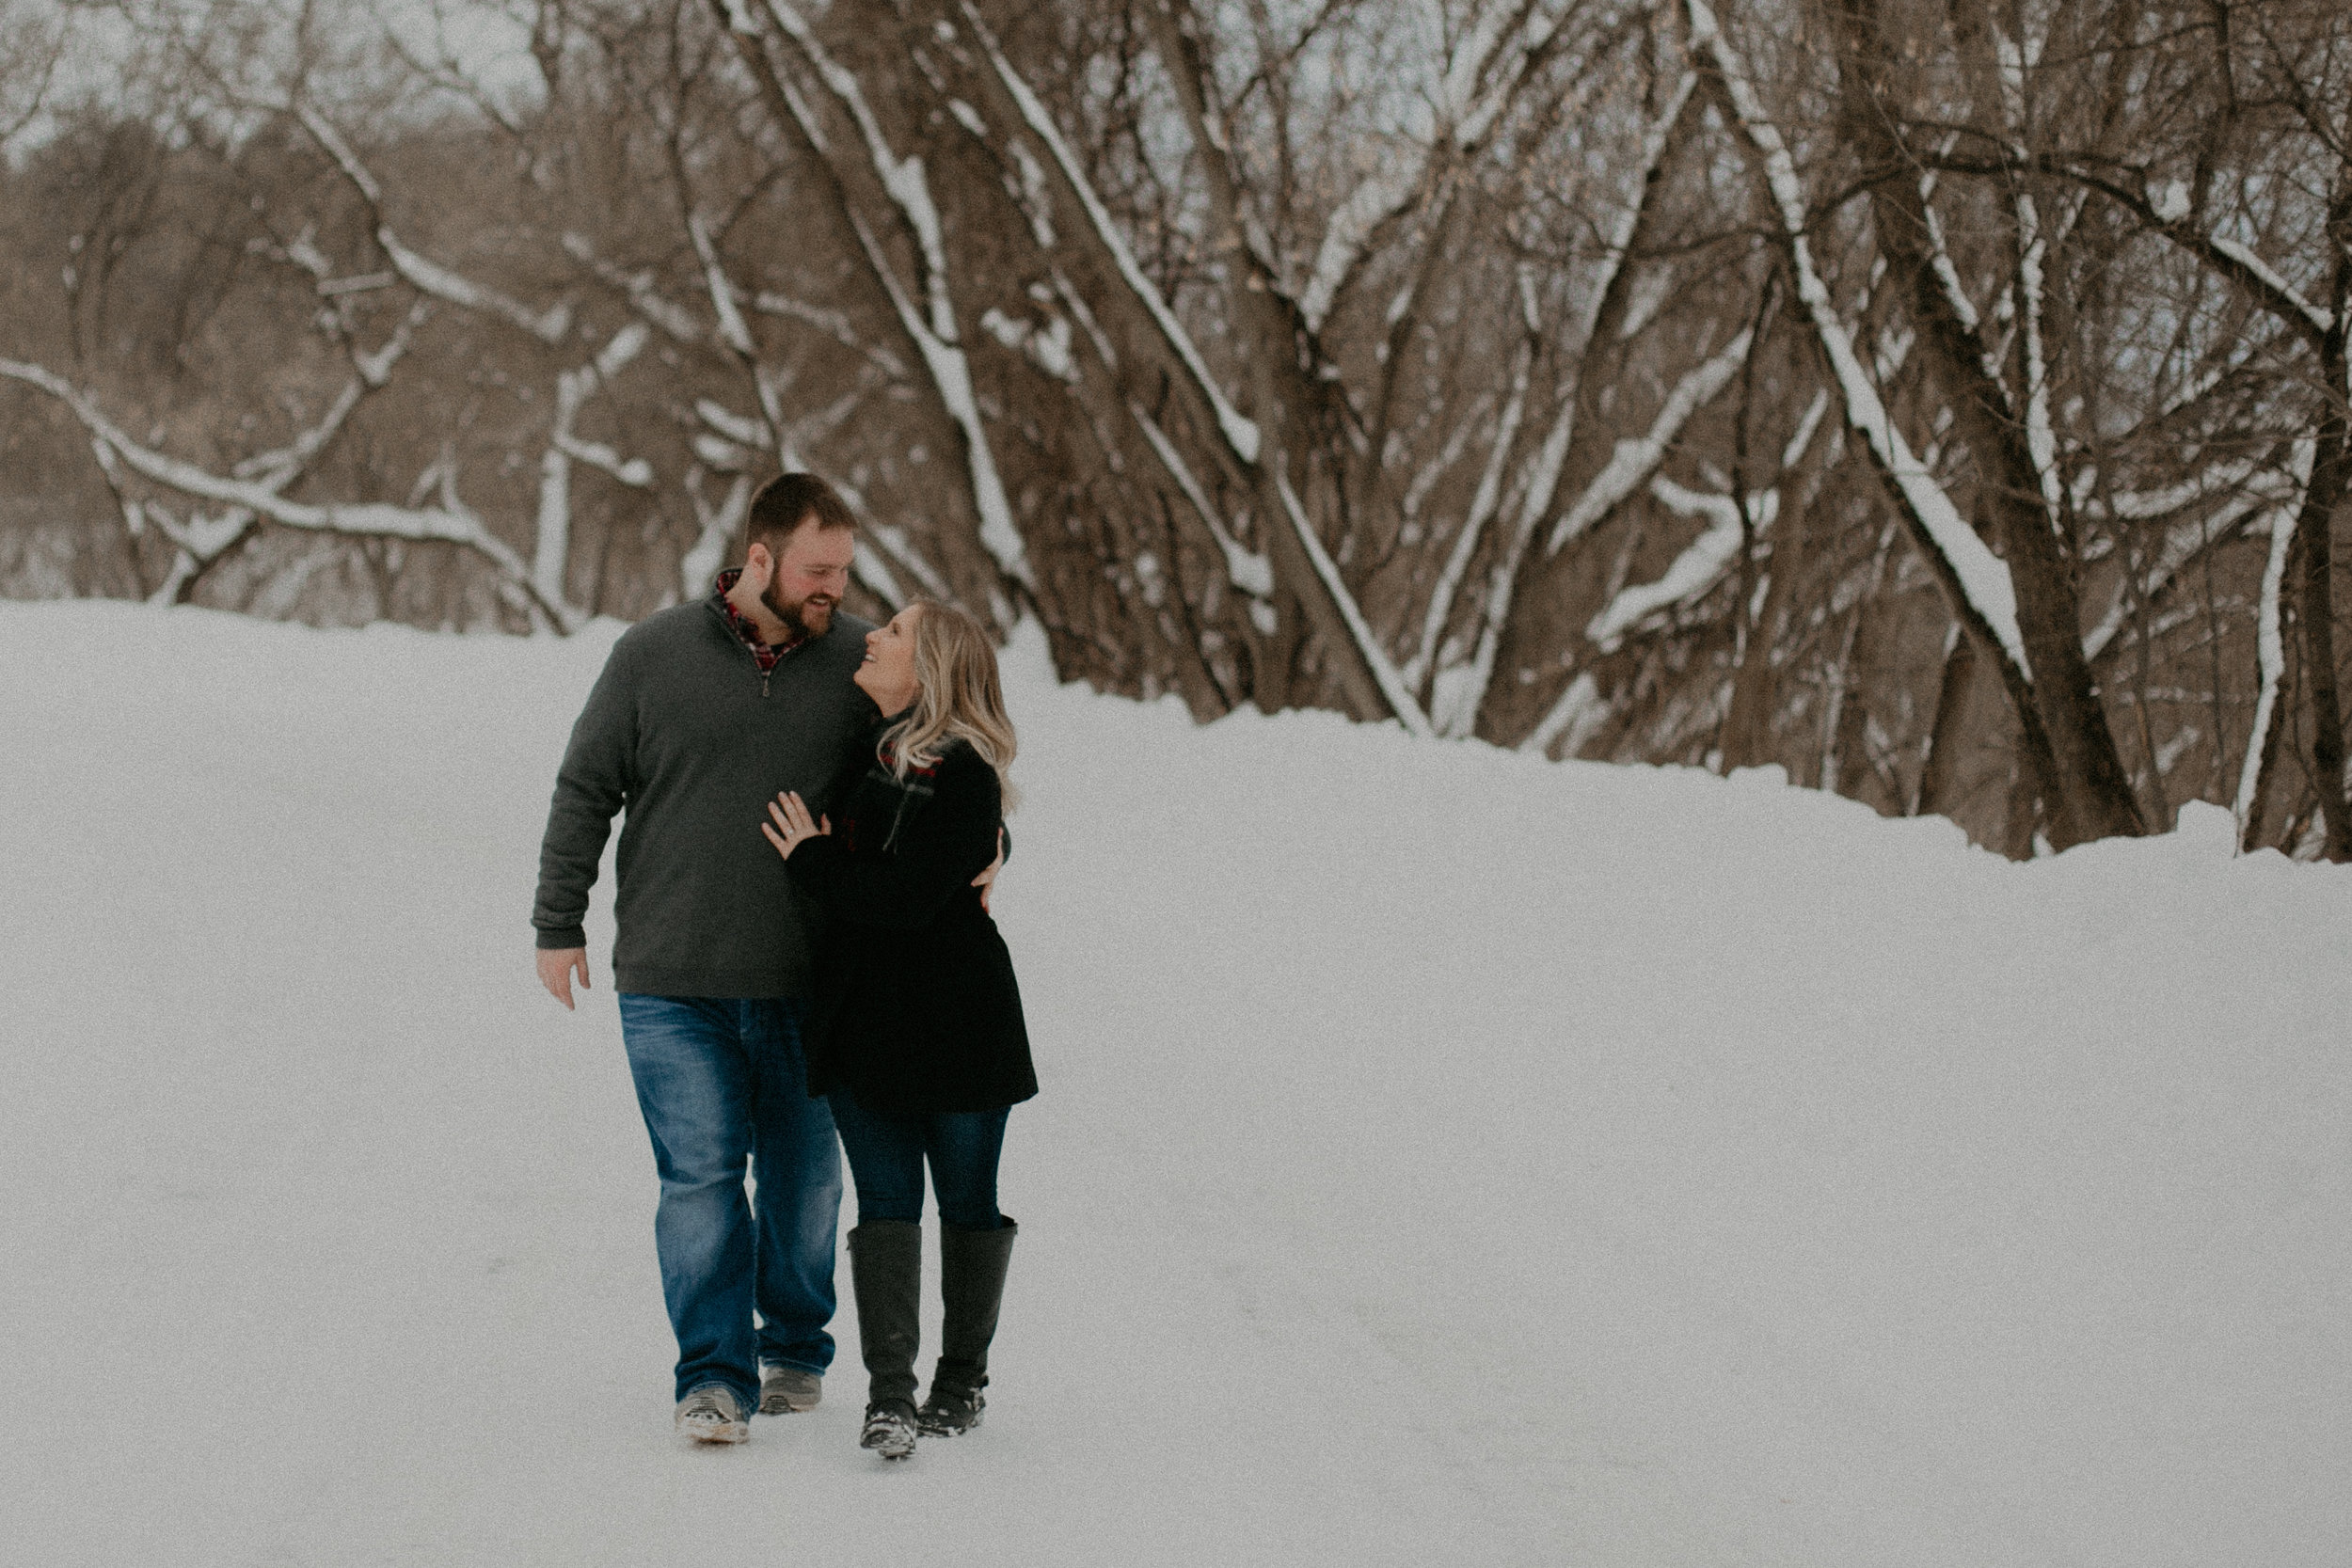  Wausau WI police officer snuggles in the winter snow with his fiancé during their engagement session 